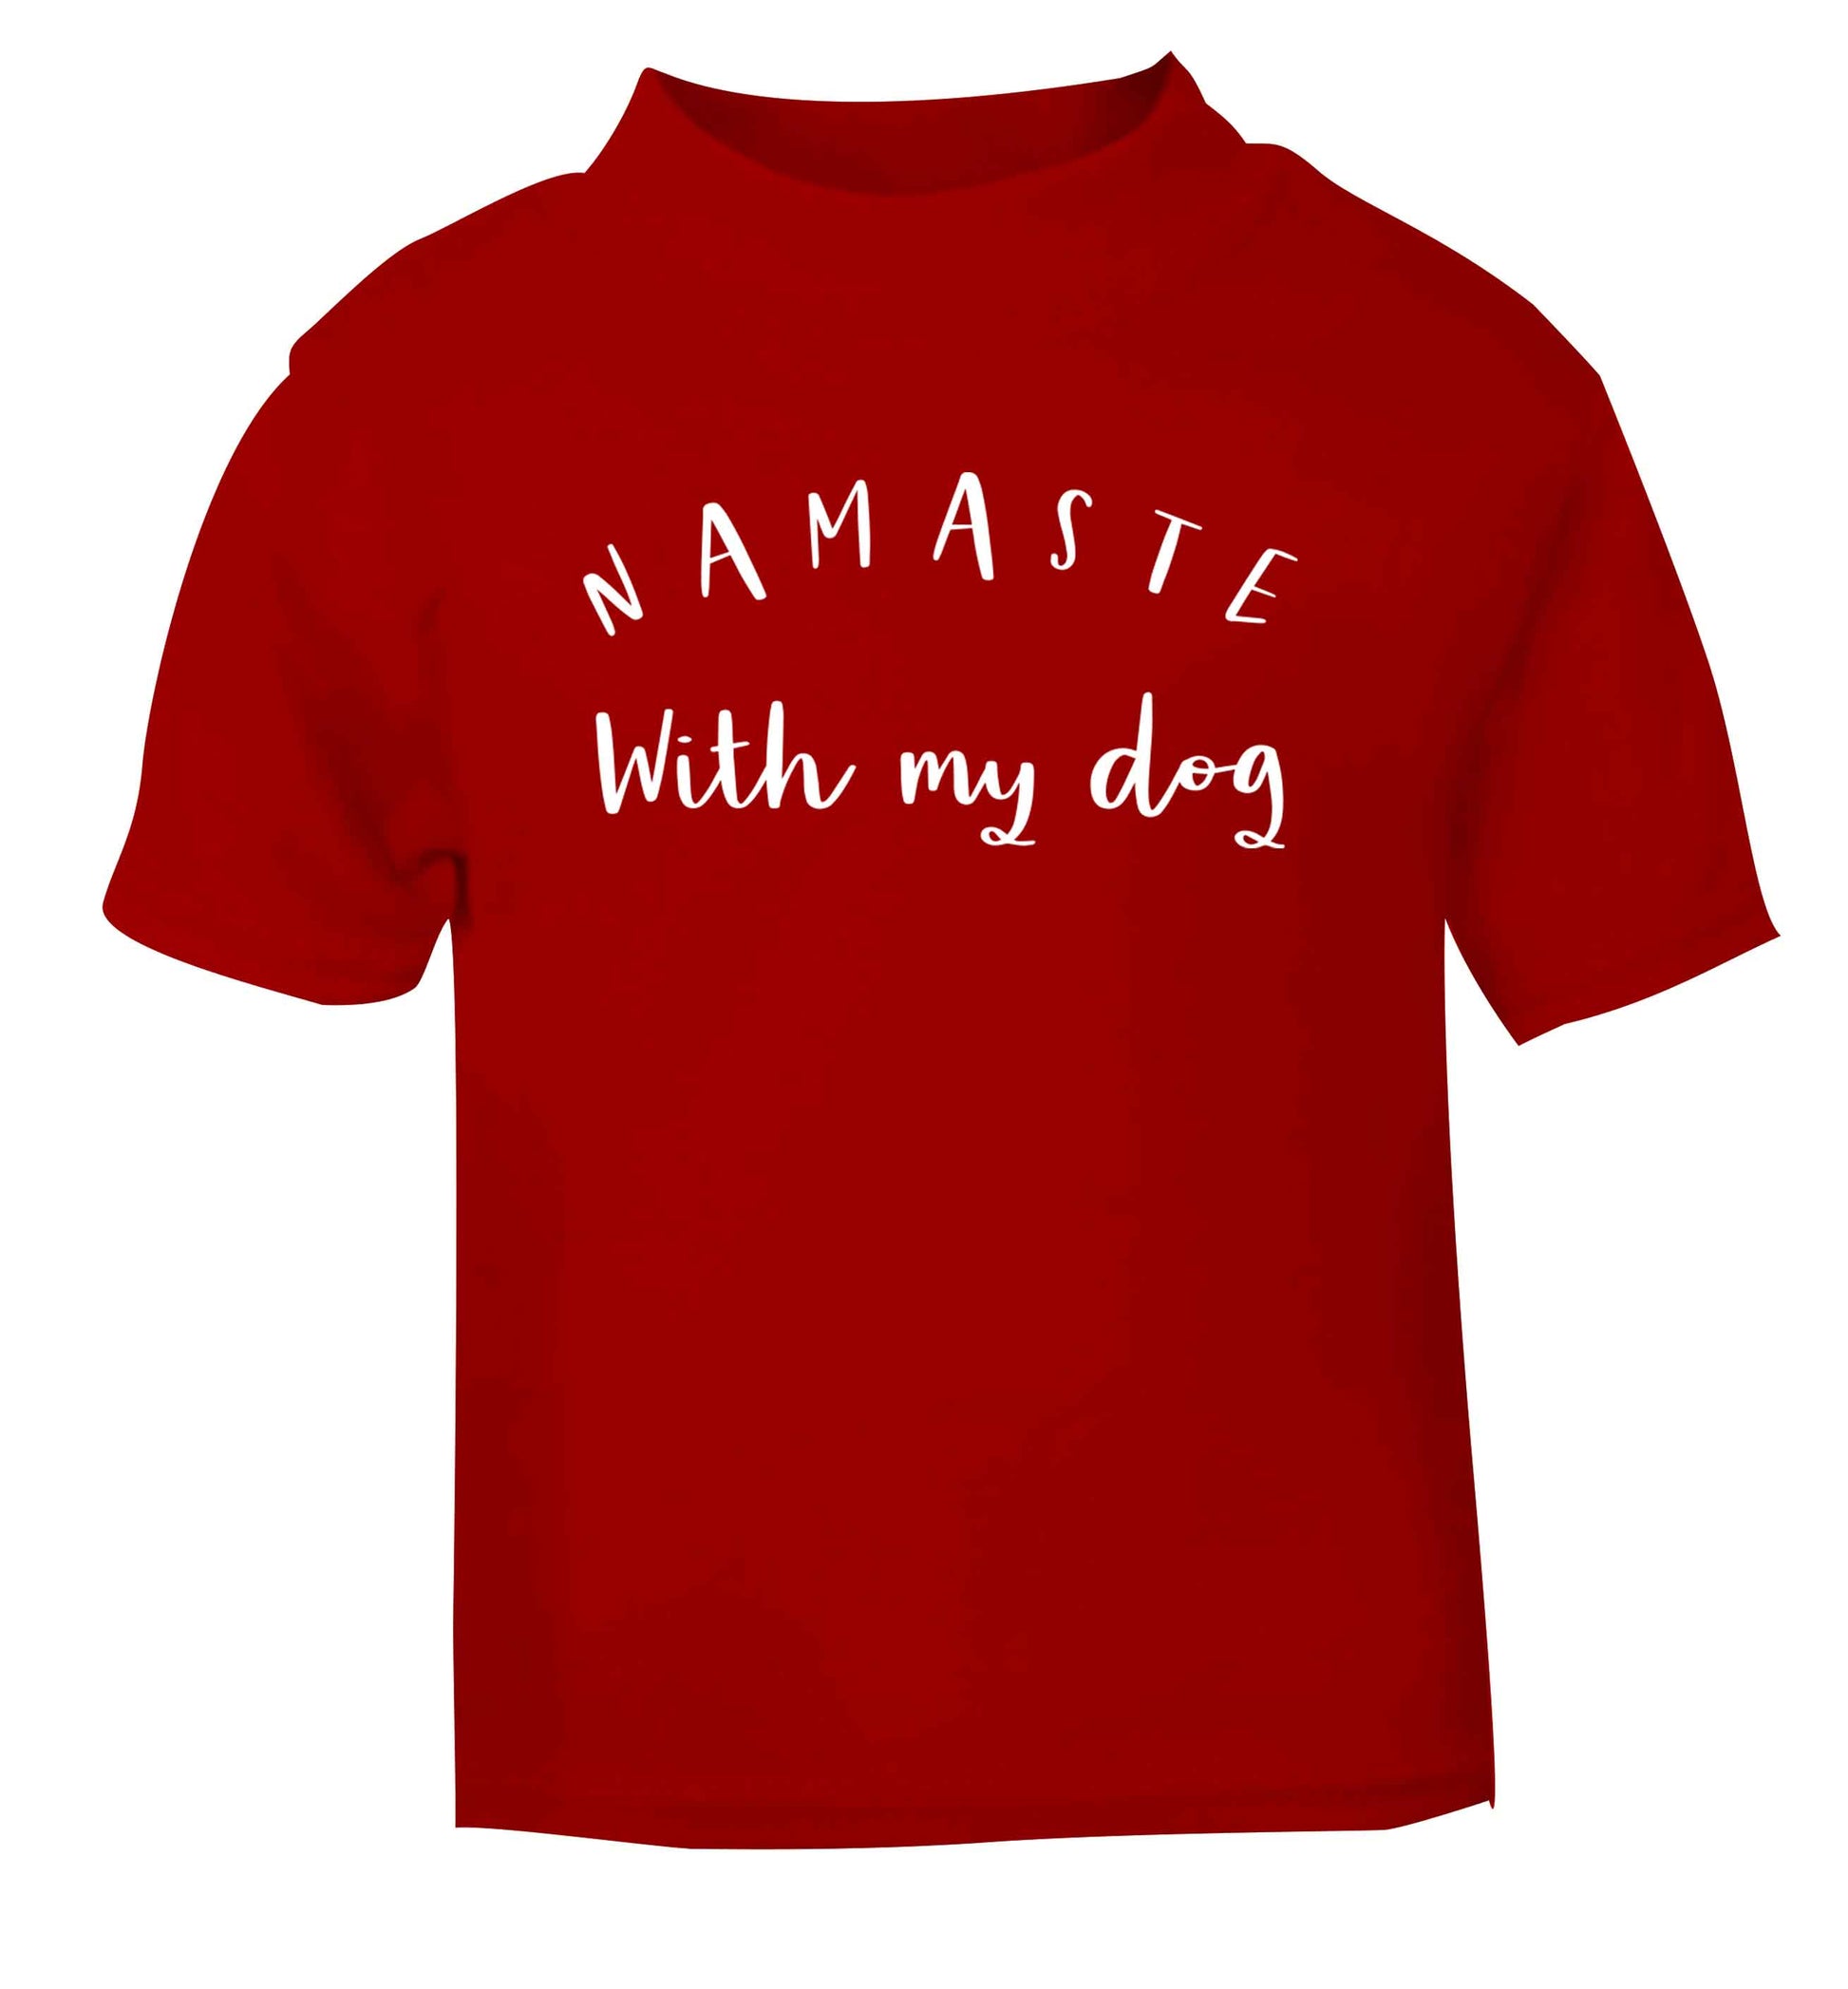 Namaste with my dog red Baby Toddler Tshirt 2 Years